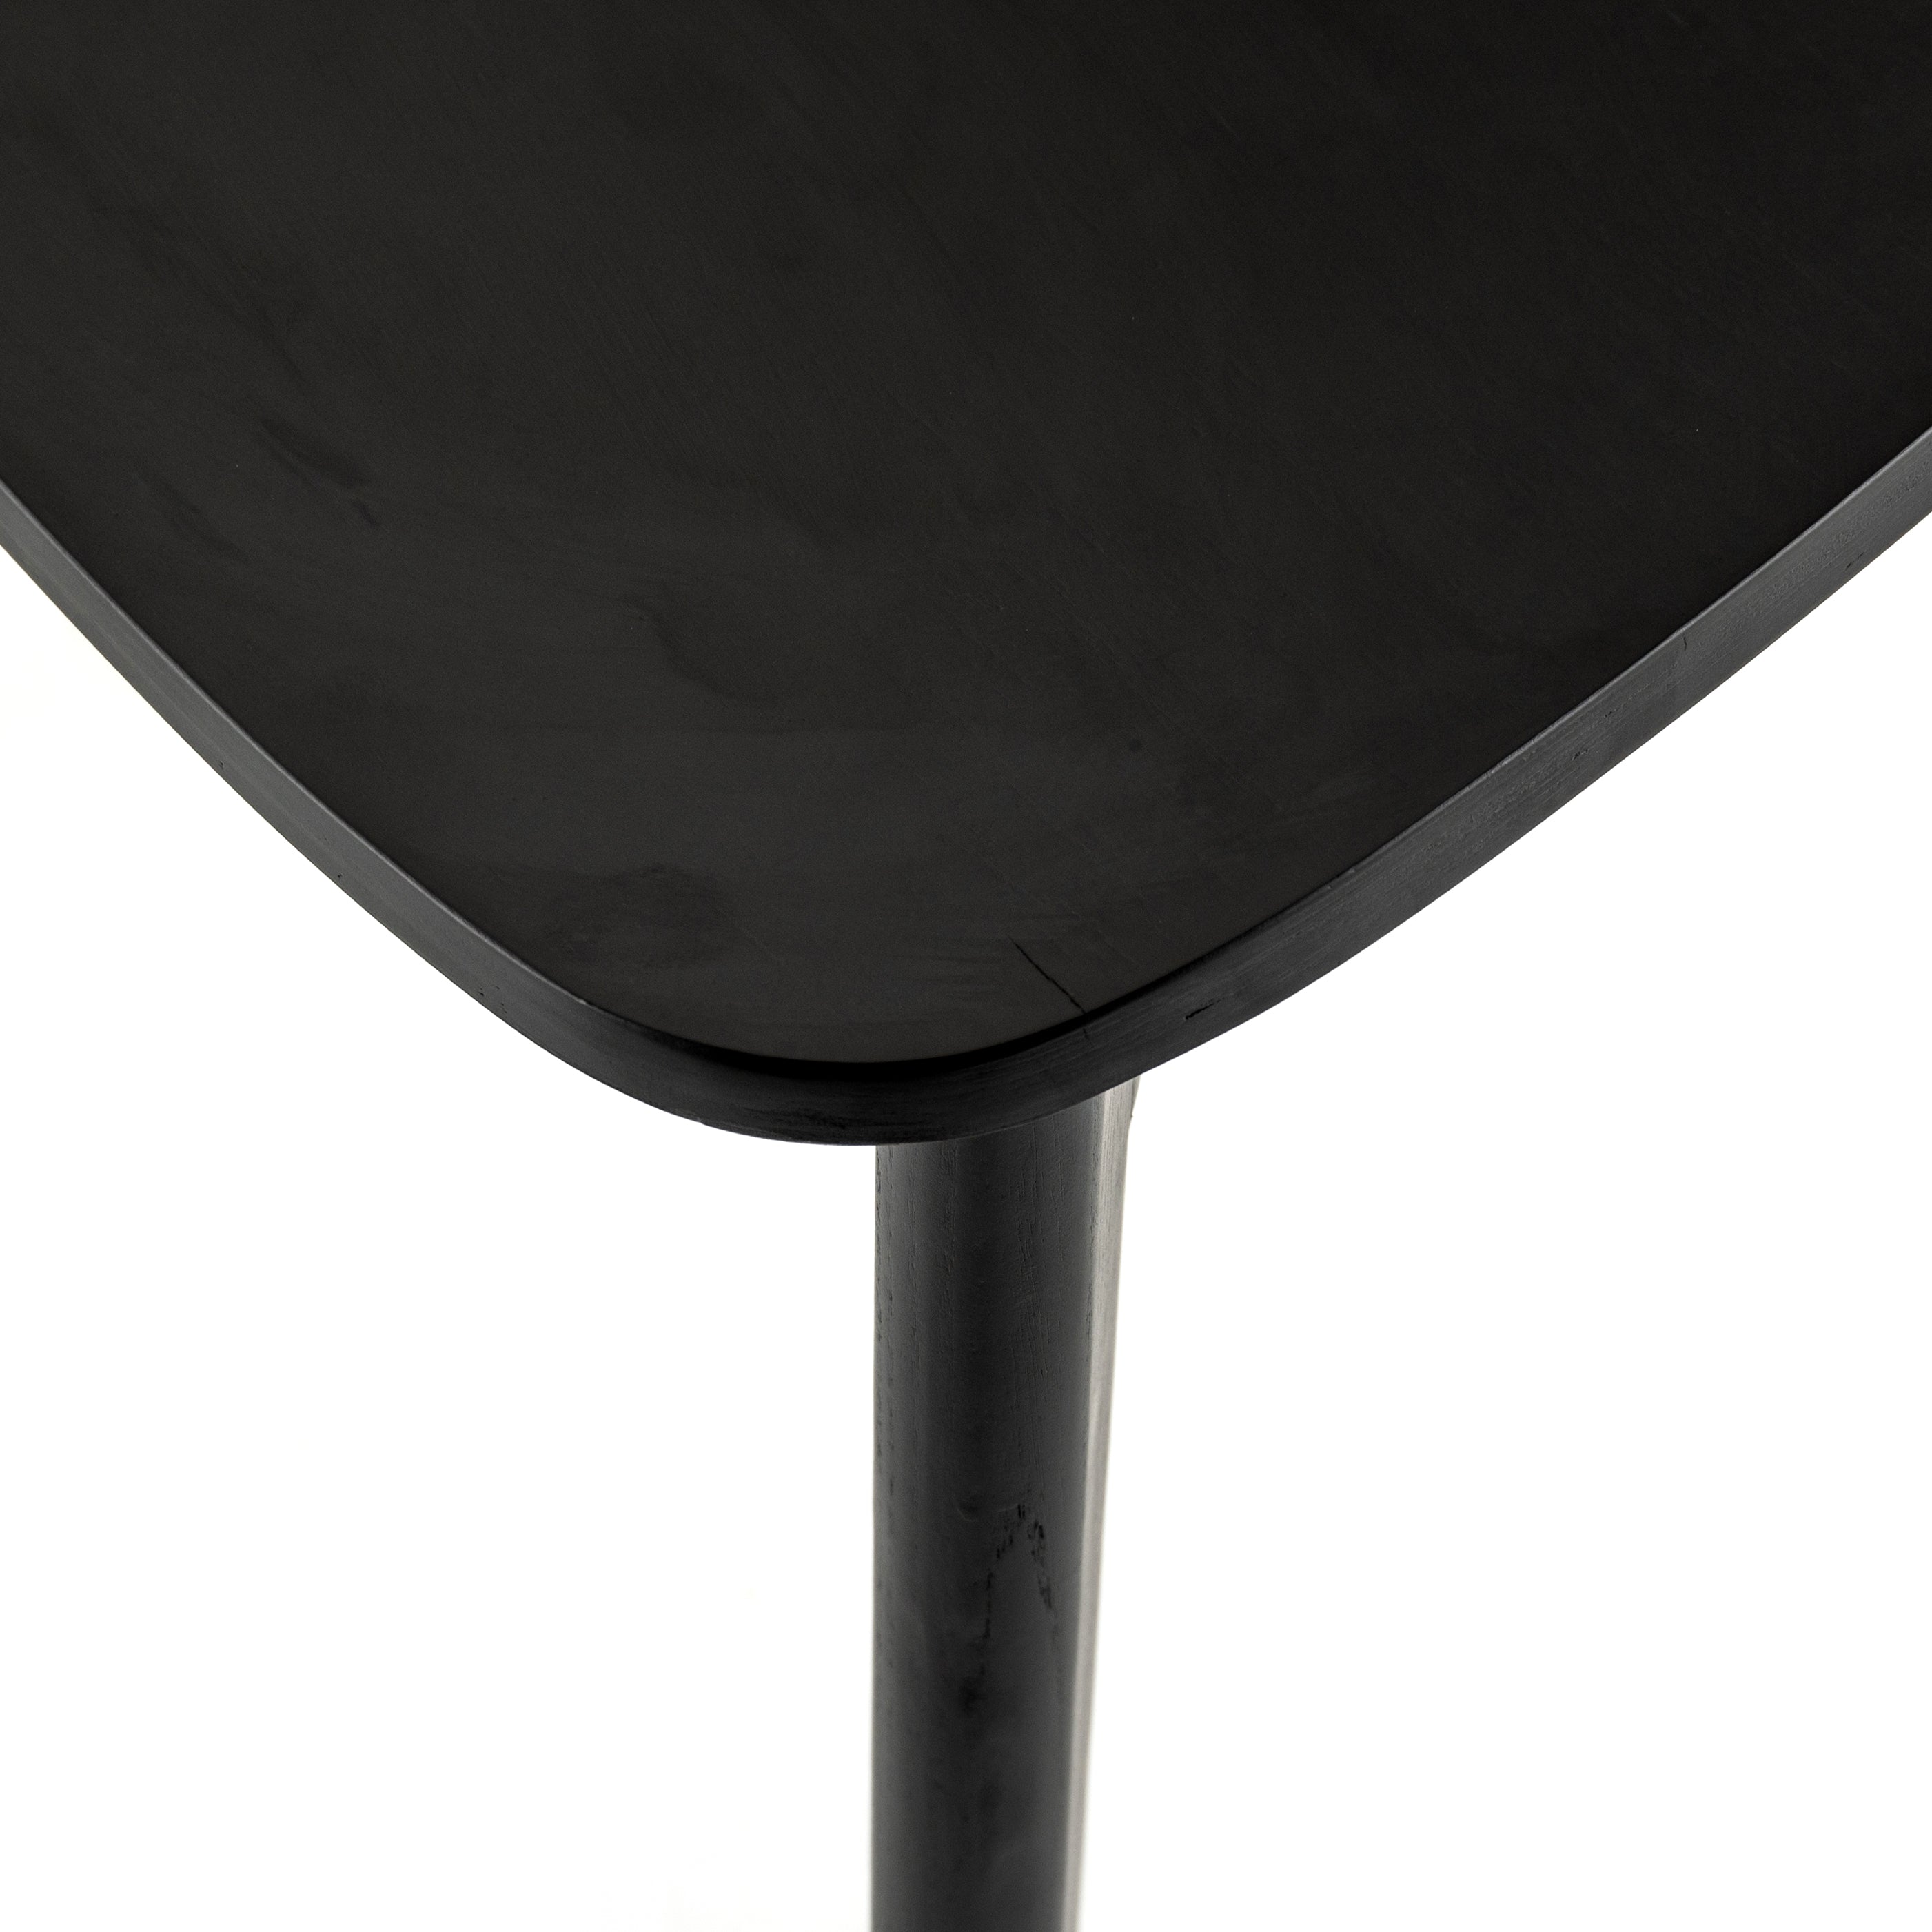 We love the exaggerated winged back of this Franco Black Dining Chair. The jet balck finish brings a modern look to this mid-century style.   Overall Dimensions: 20.50"w x 19.25"d x 30.25"h Seat Depth: 16.25" Seat Height: 18"  Materials: Ash Veneer, Solid Ash